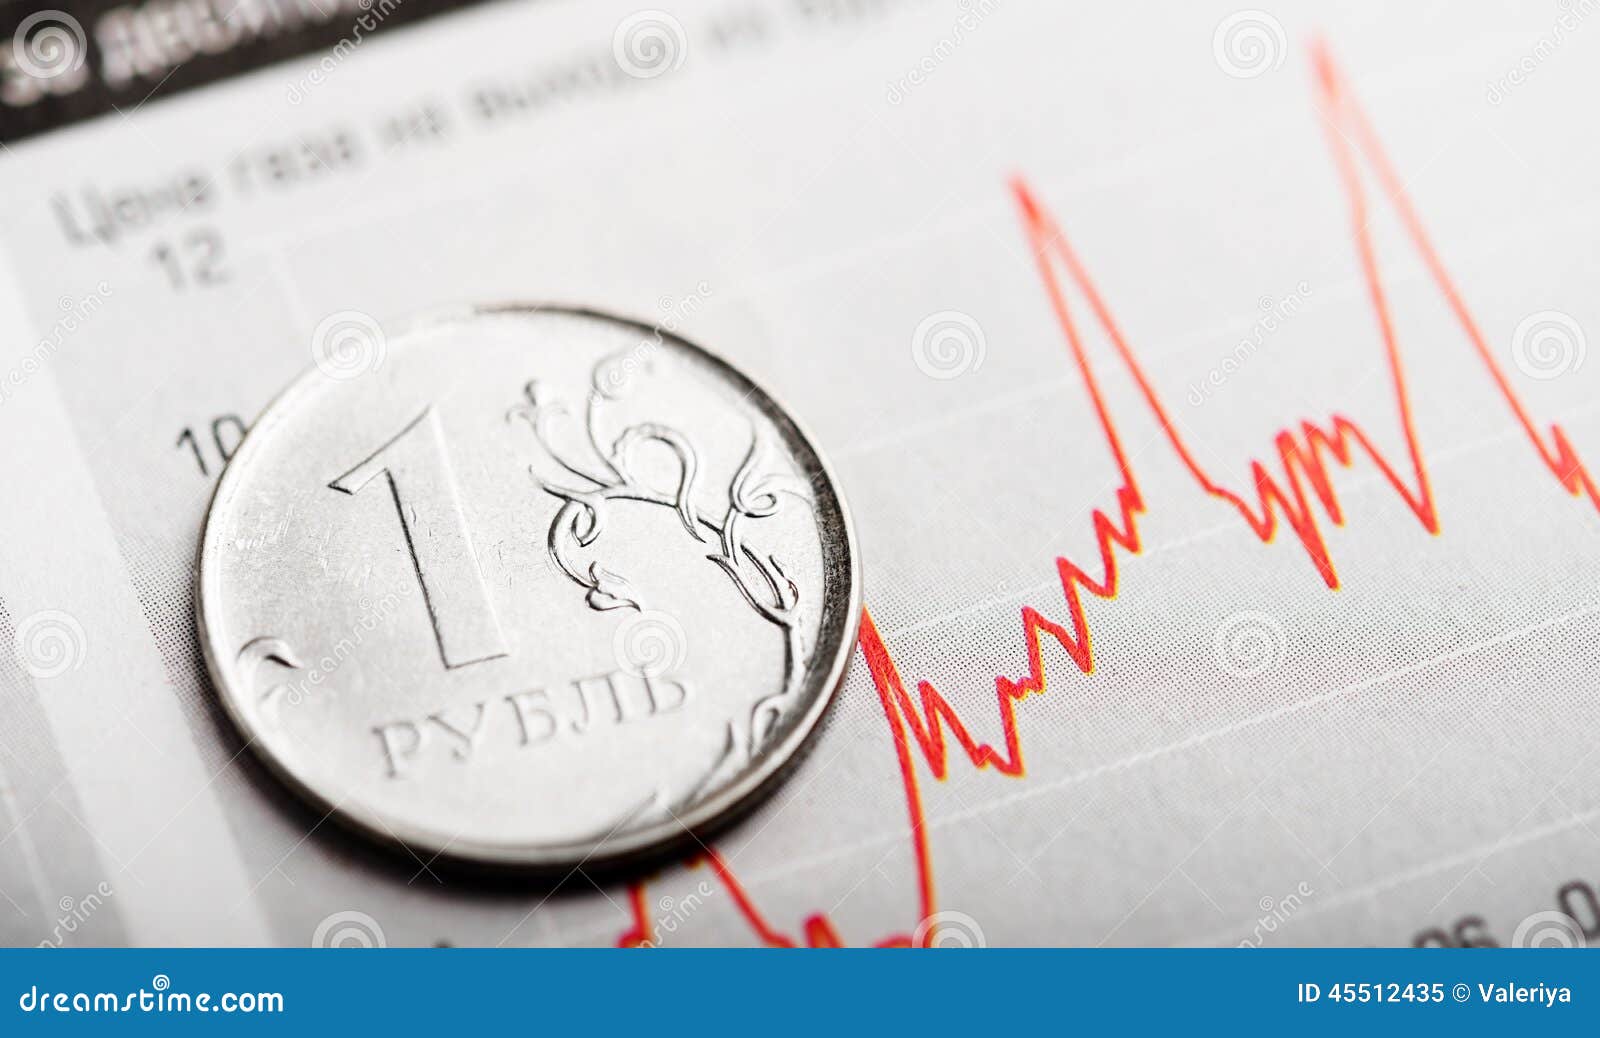 rate of the russian rouble (shallow dof)